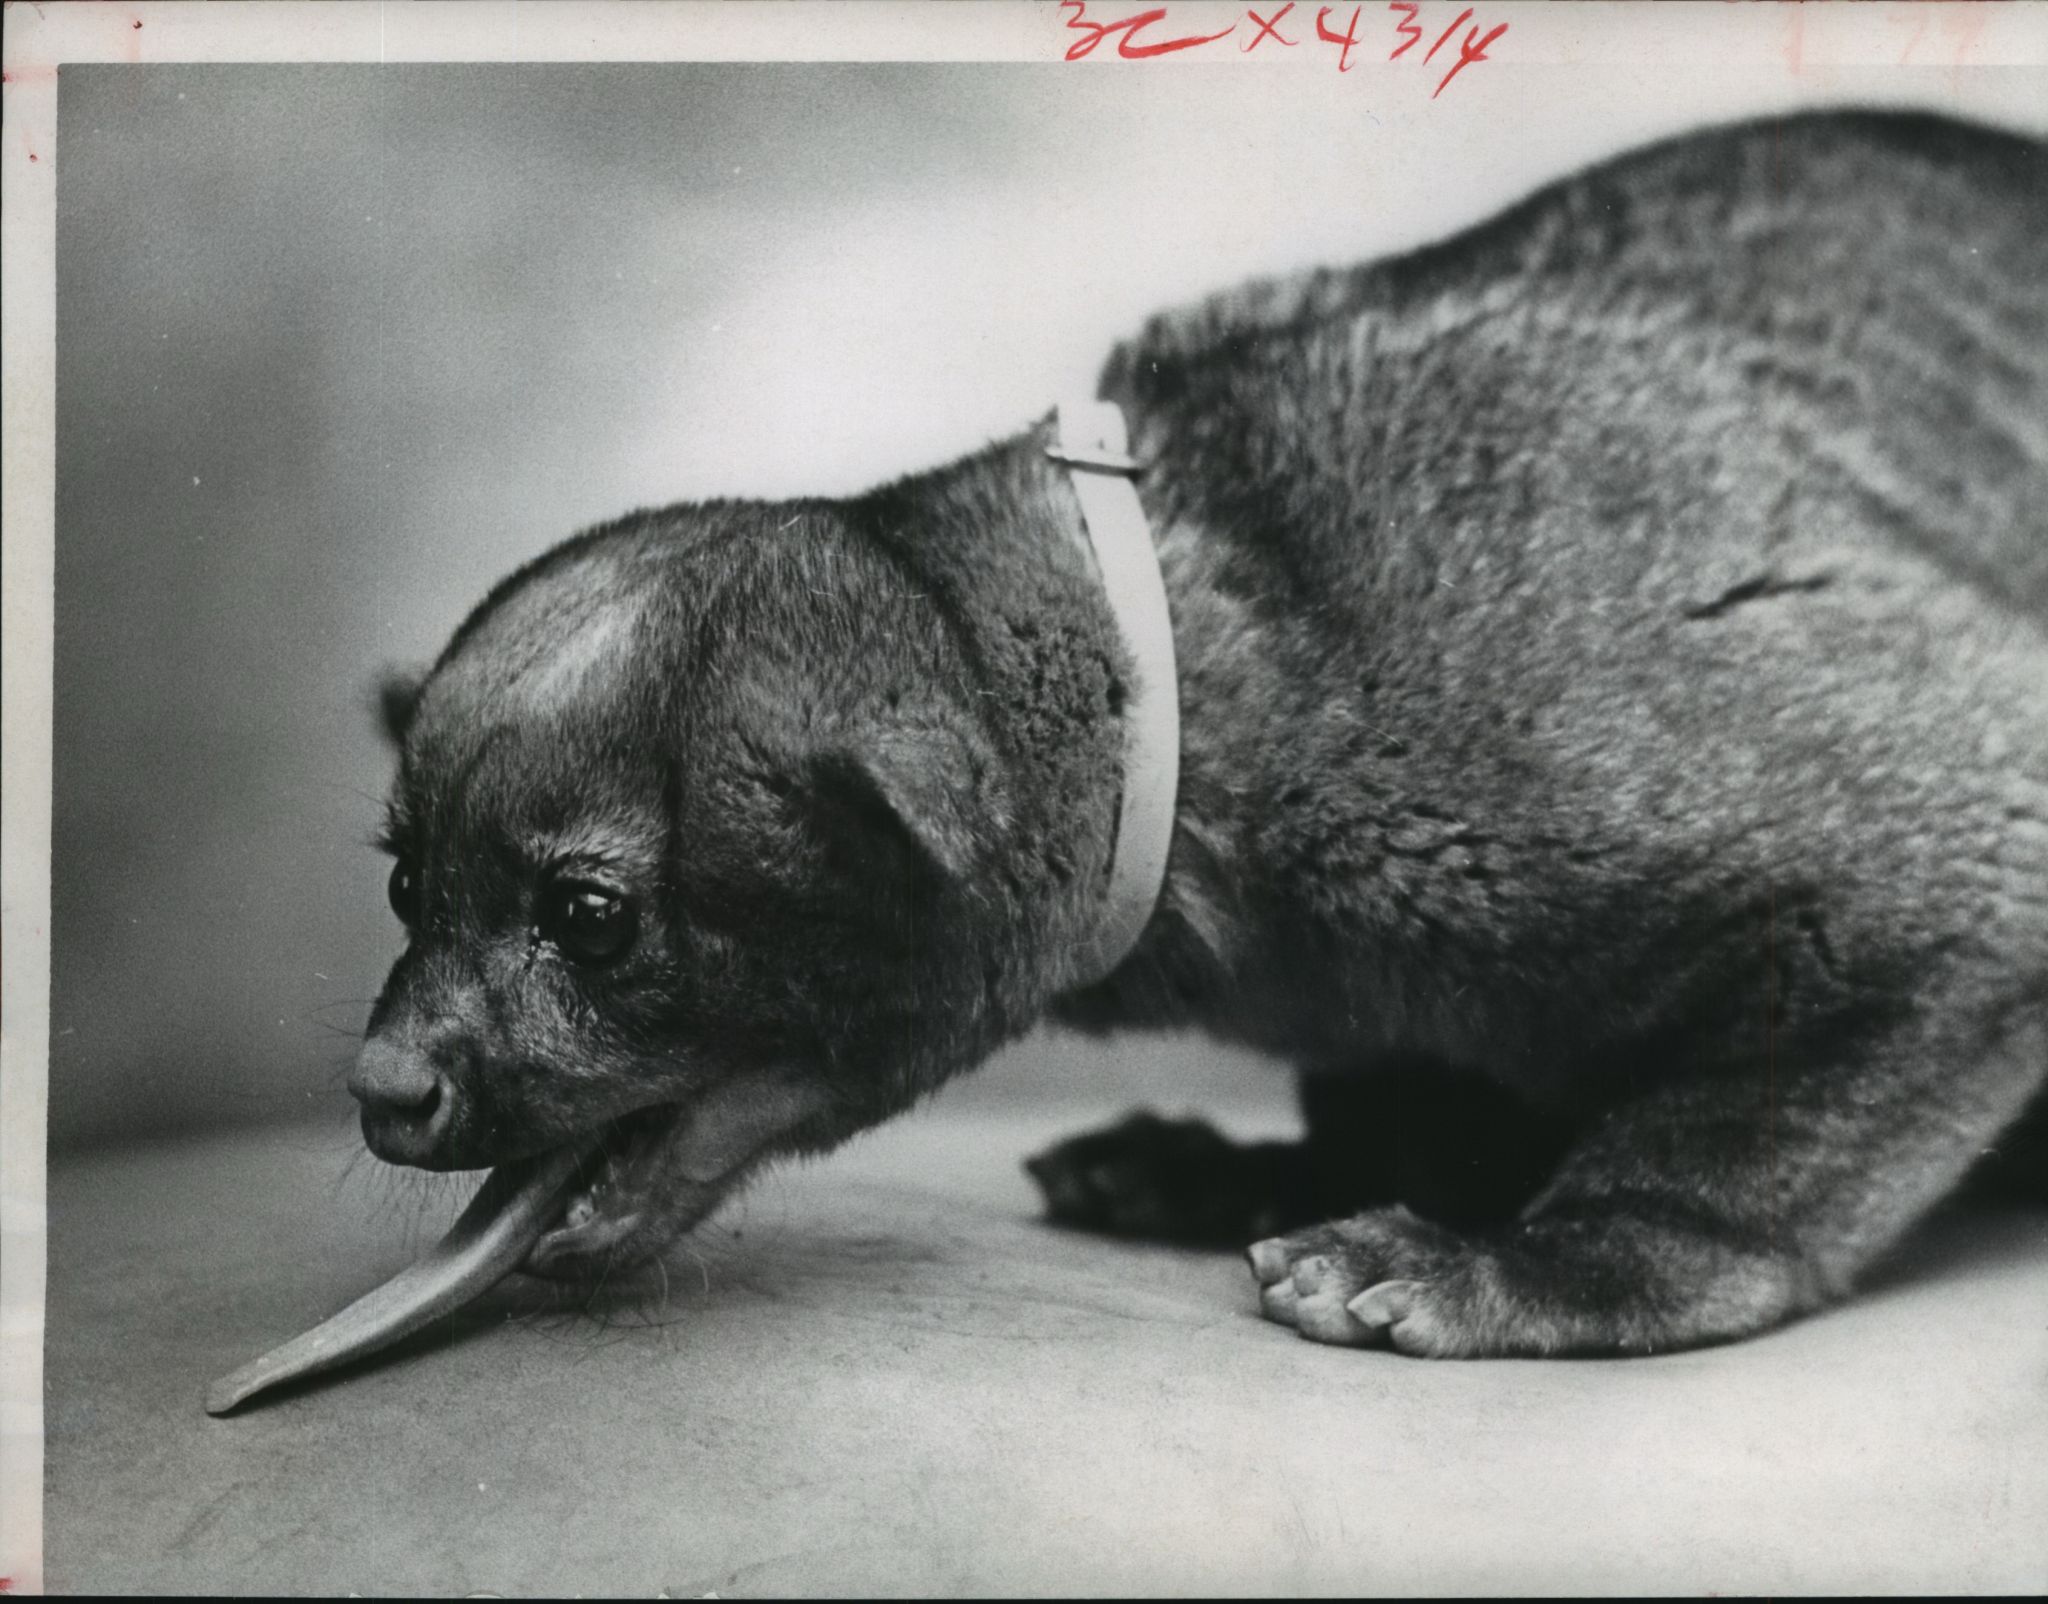 Crazy critters: Best animal photos from the Chronicle archives